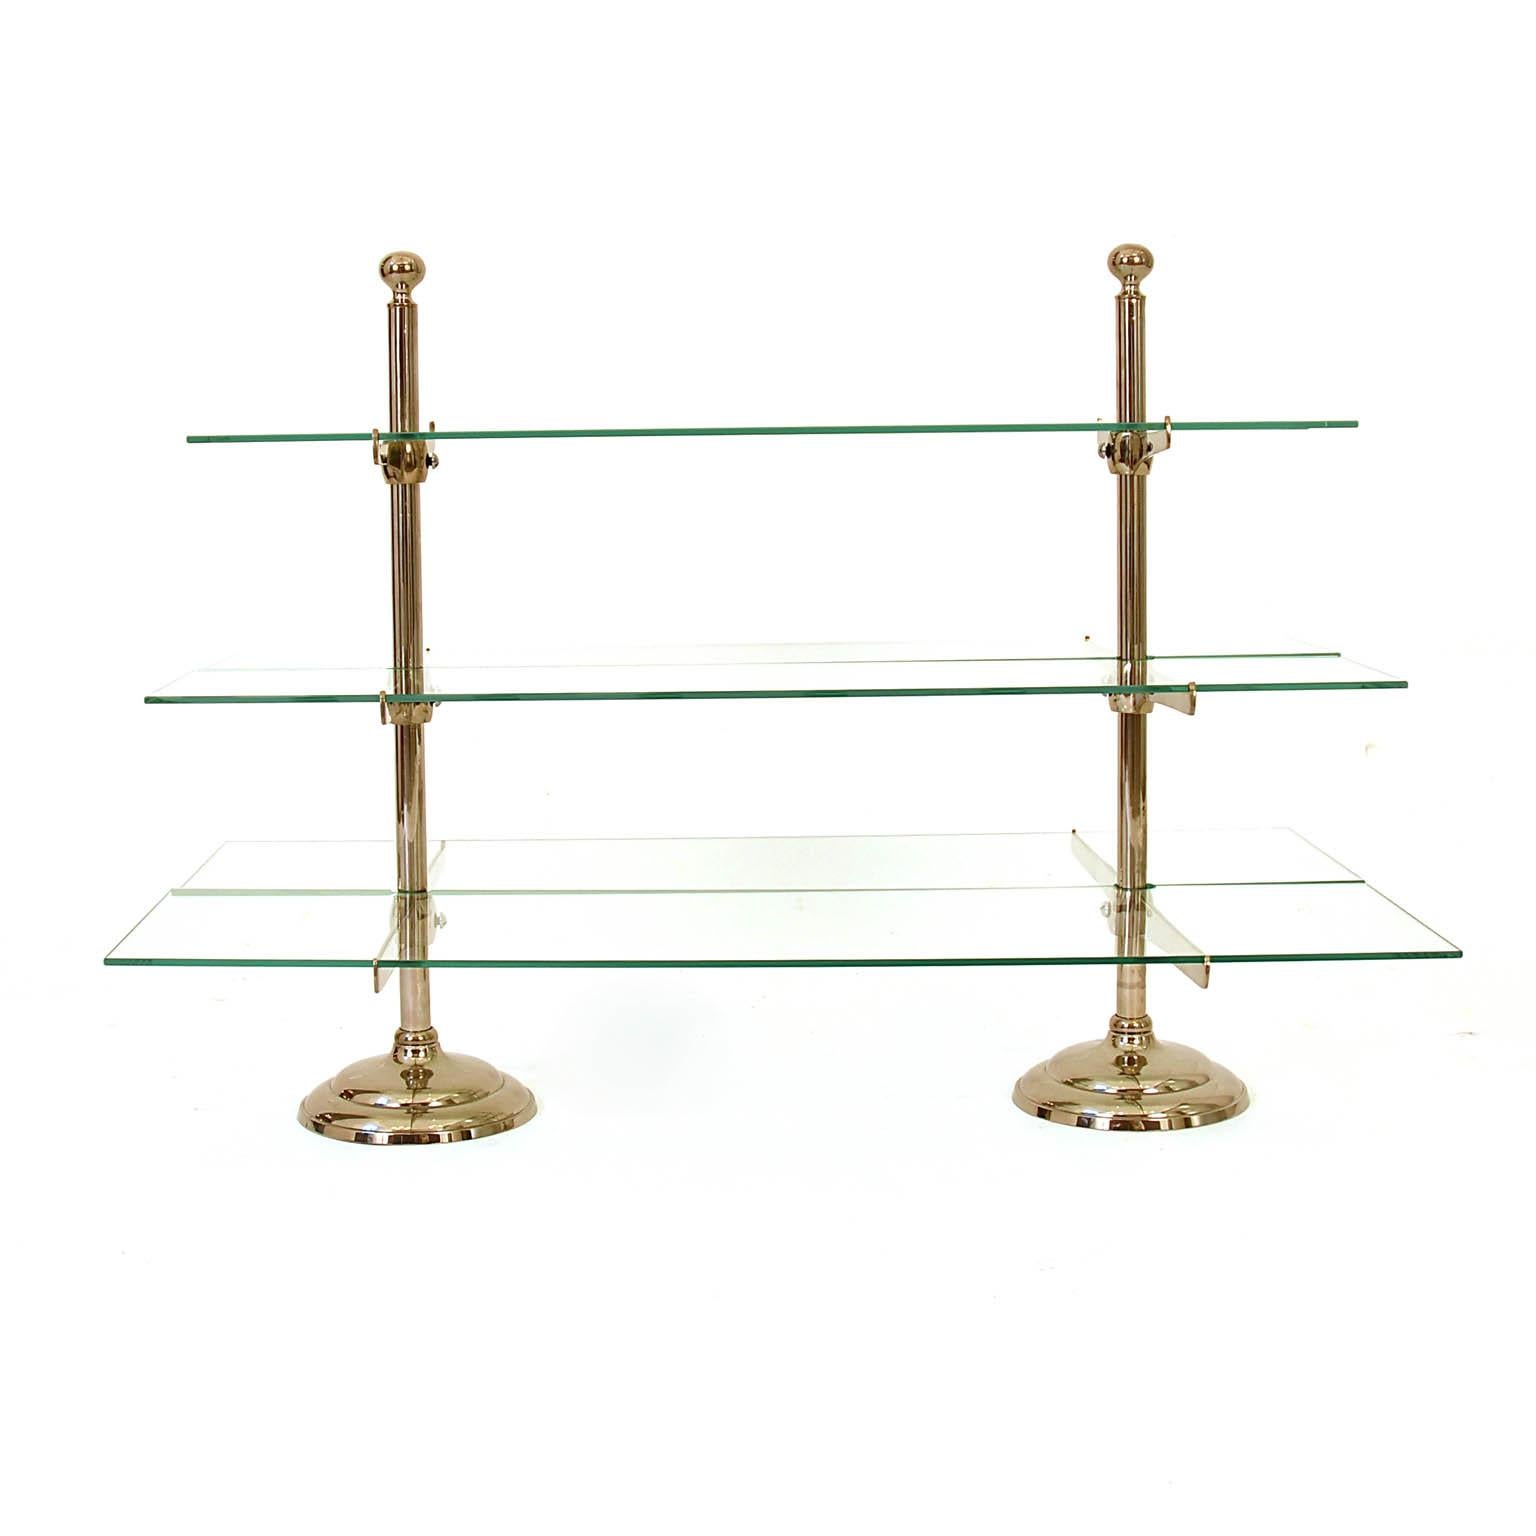 Beautiful and high quality 20th century Art Deco glass storage rack made in France. An elegant shop display carried by a nickel metal frame. Maybe for a confectionary étagère from a Pâtisserie, or to display valuables. The three metal holders can be